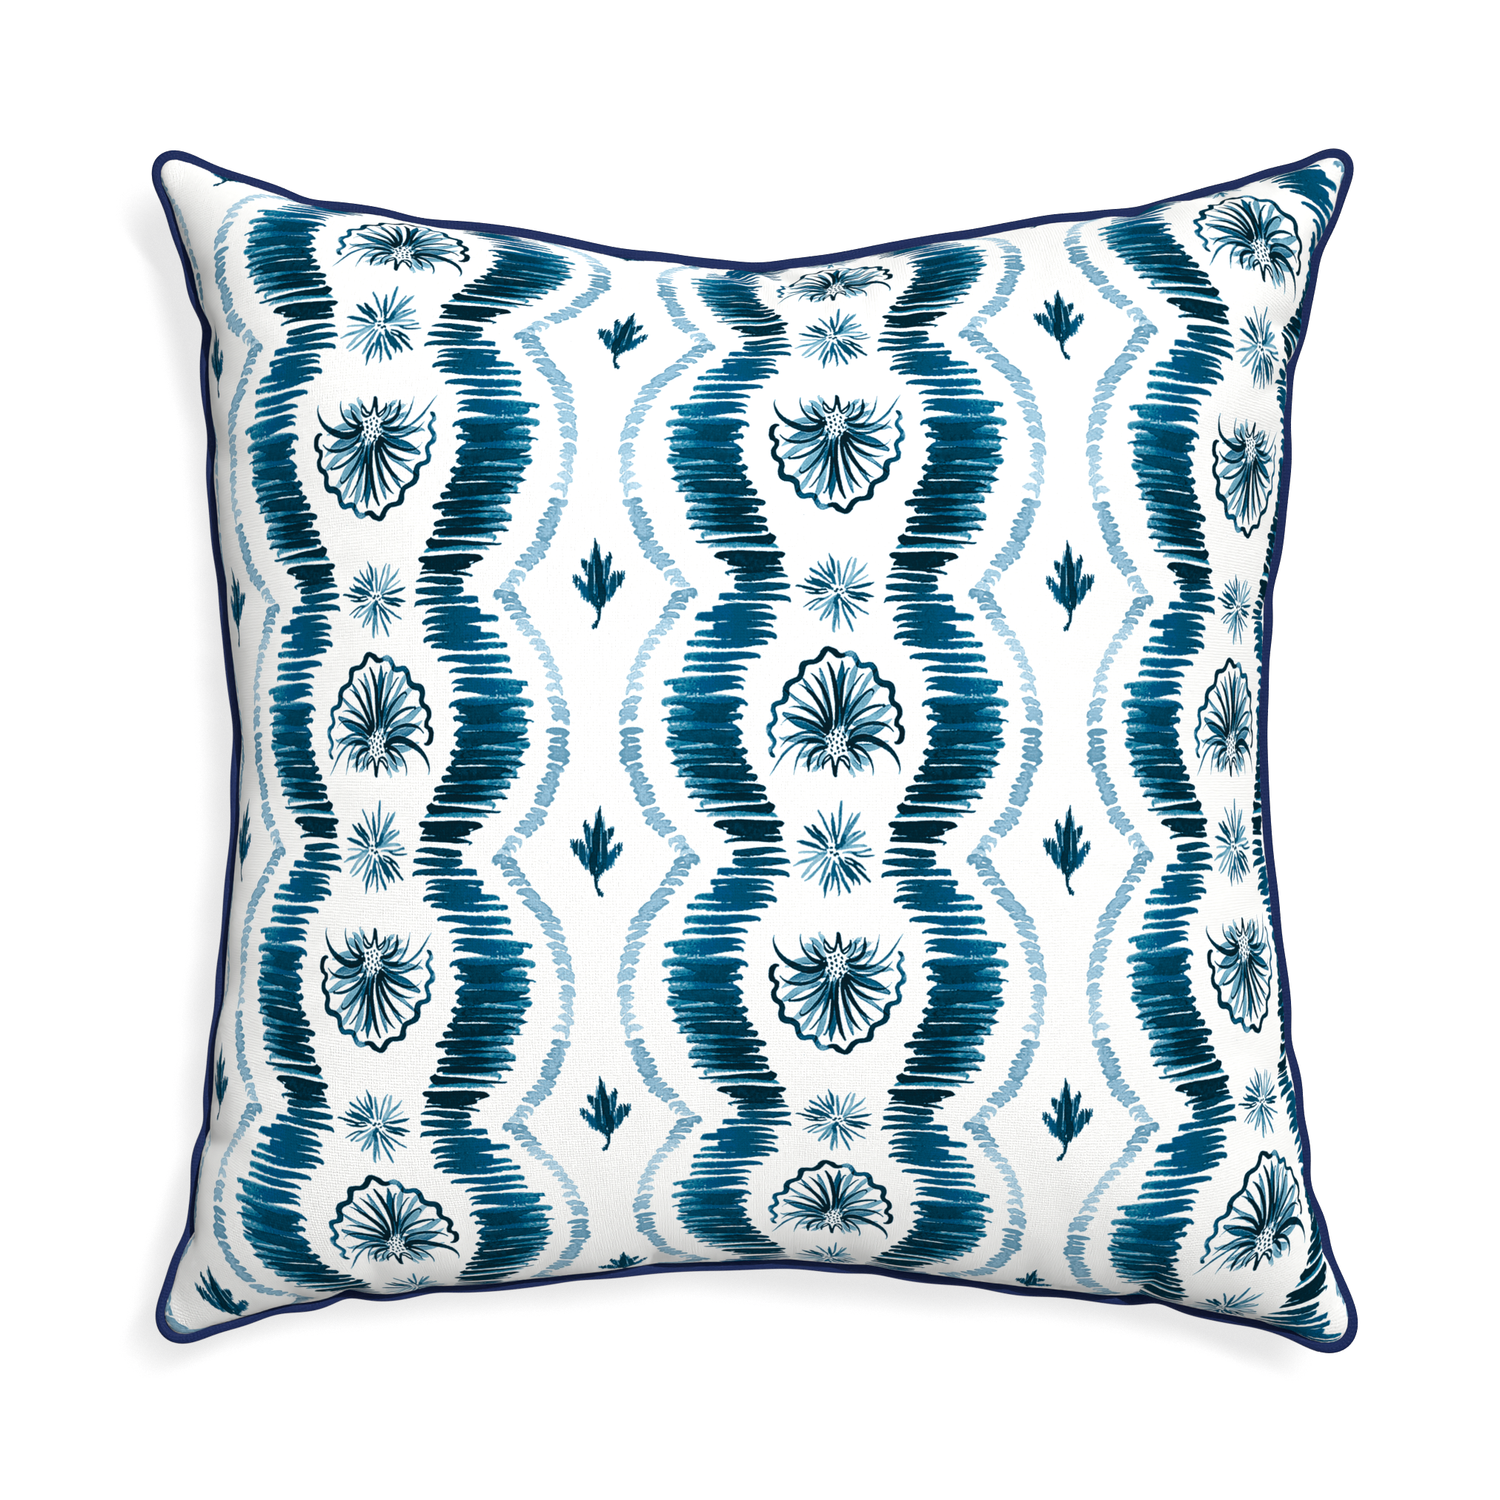 Euro-sham alice custom blue ikatpillow with midnight piping on white background